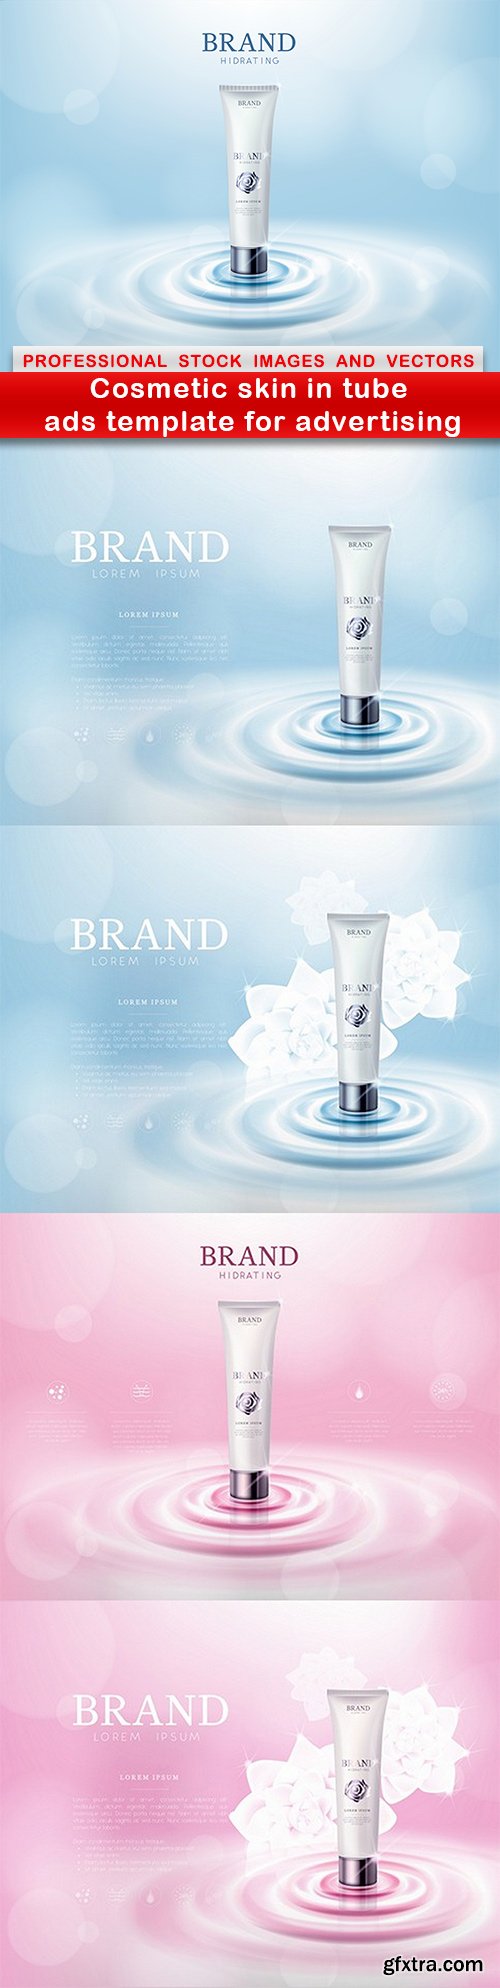 Cosmetic skin in tube ads template for advertising - 5 EPS